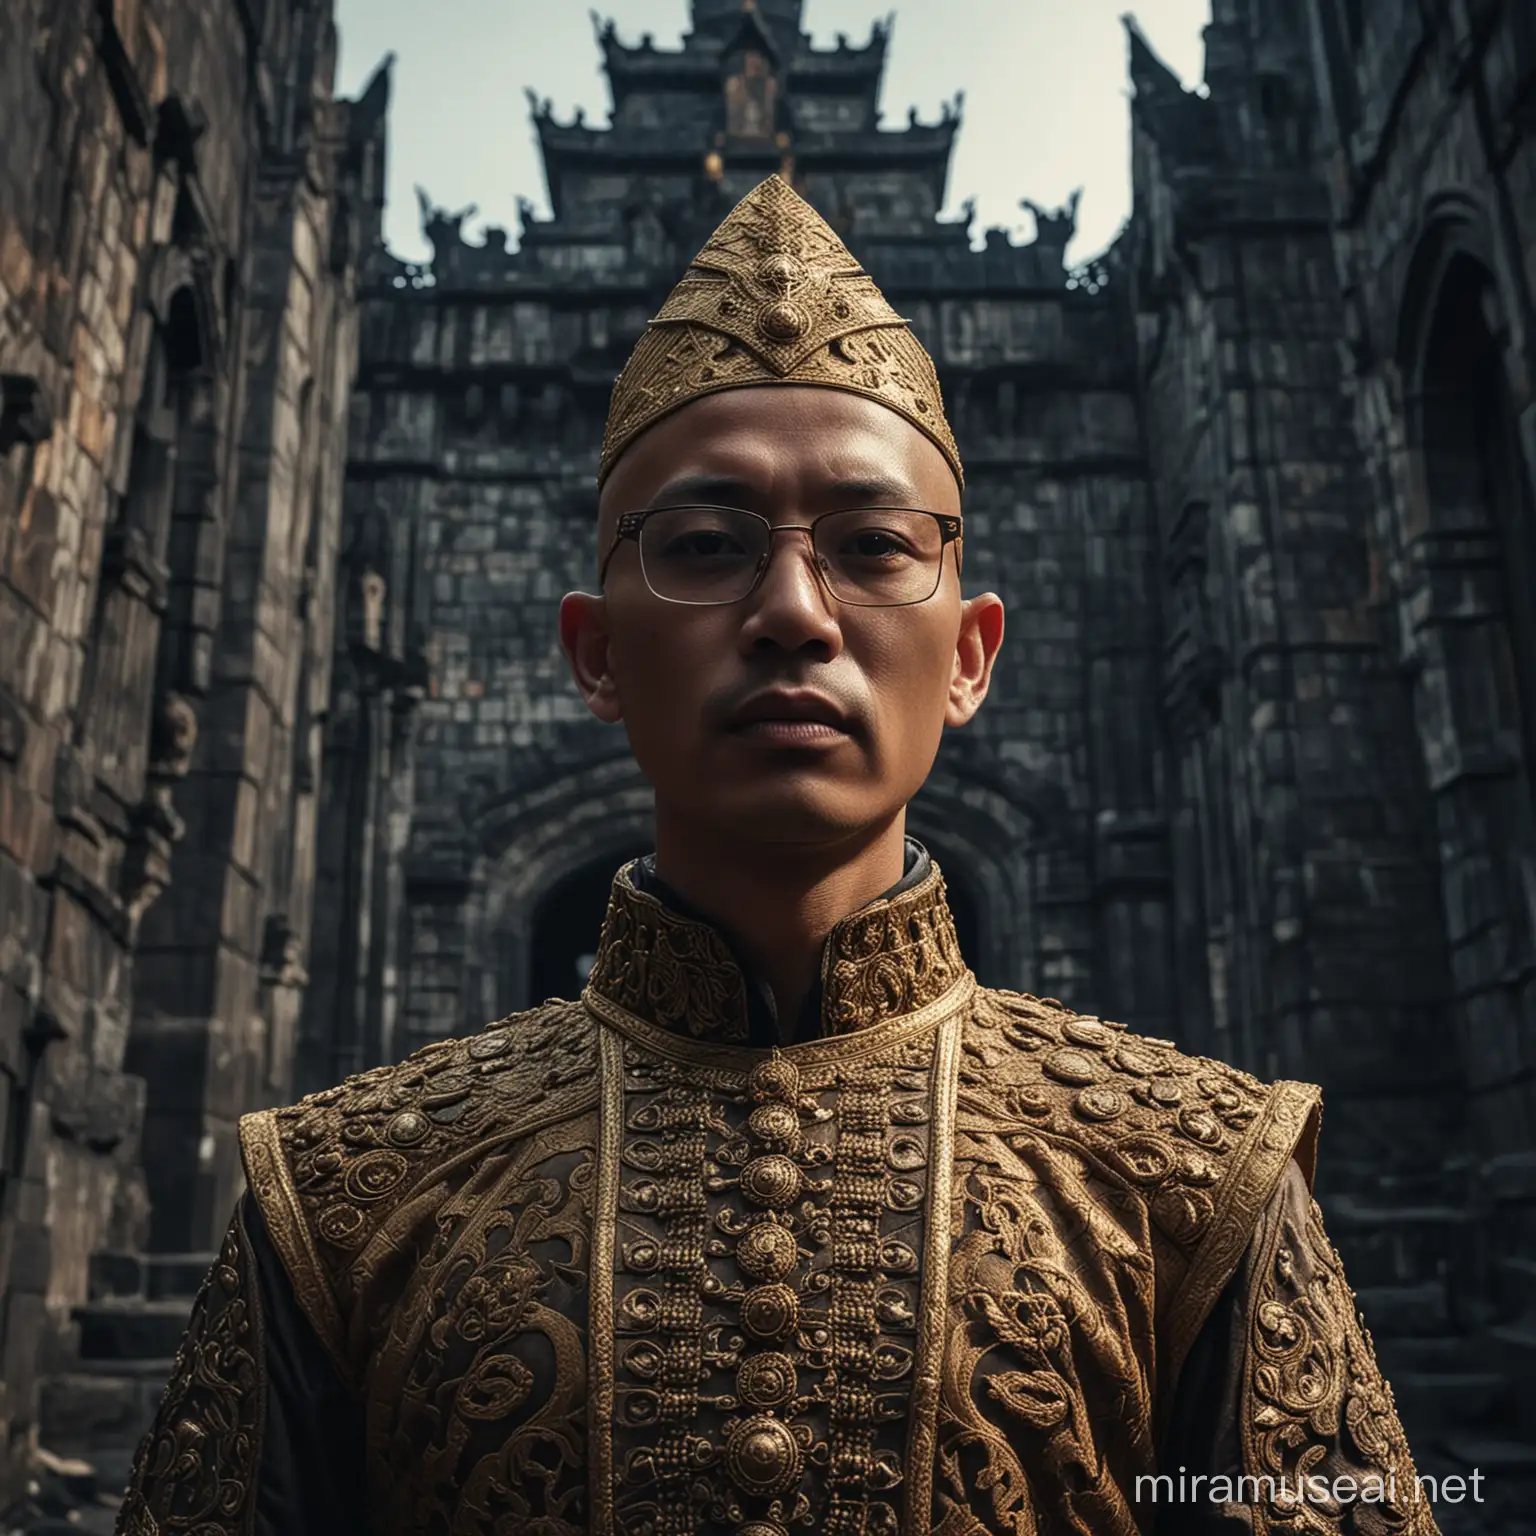 Indonesian King Stands Regally at Dark Castle Edge